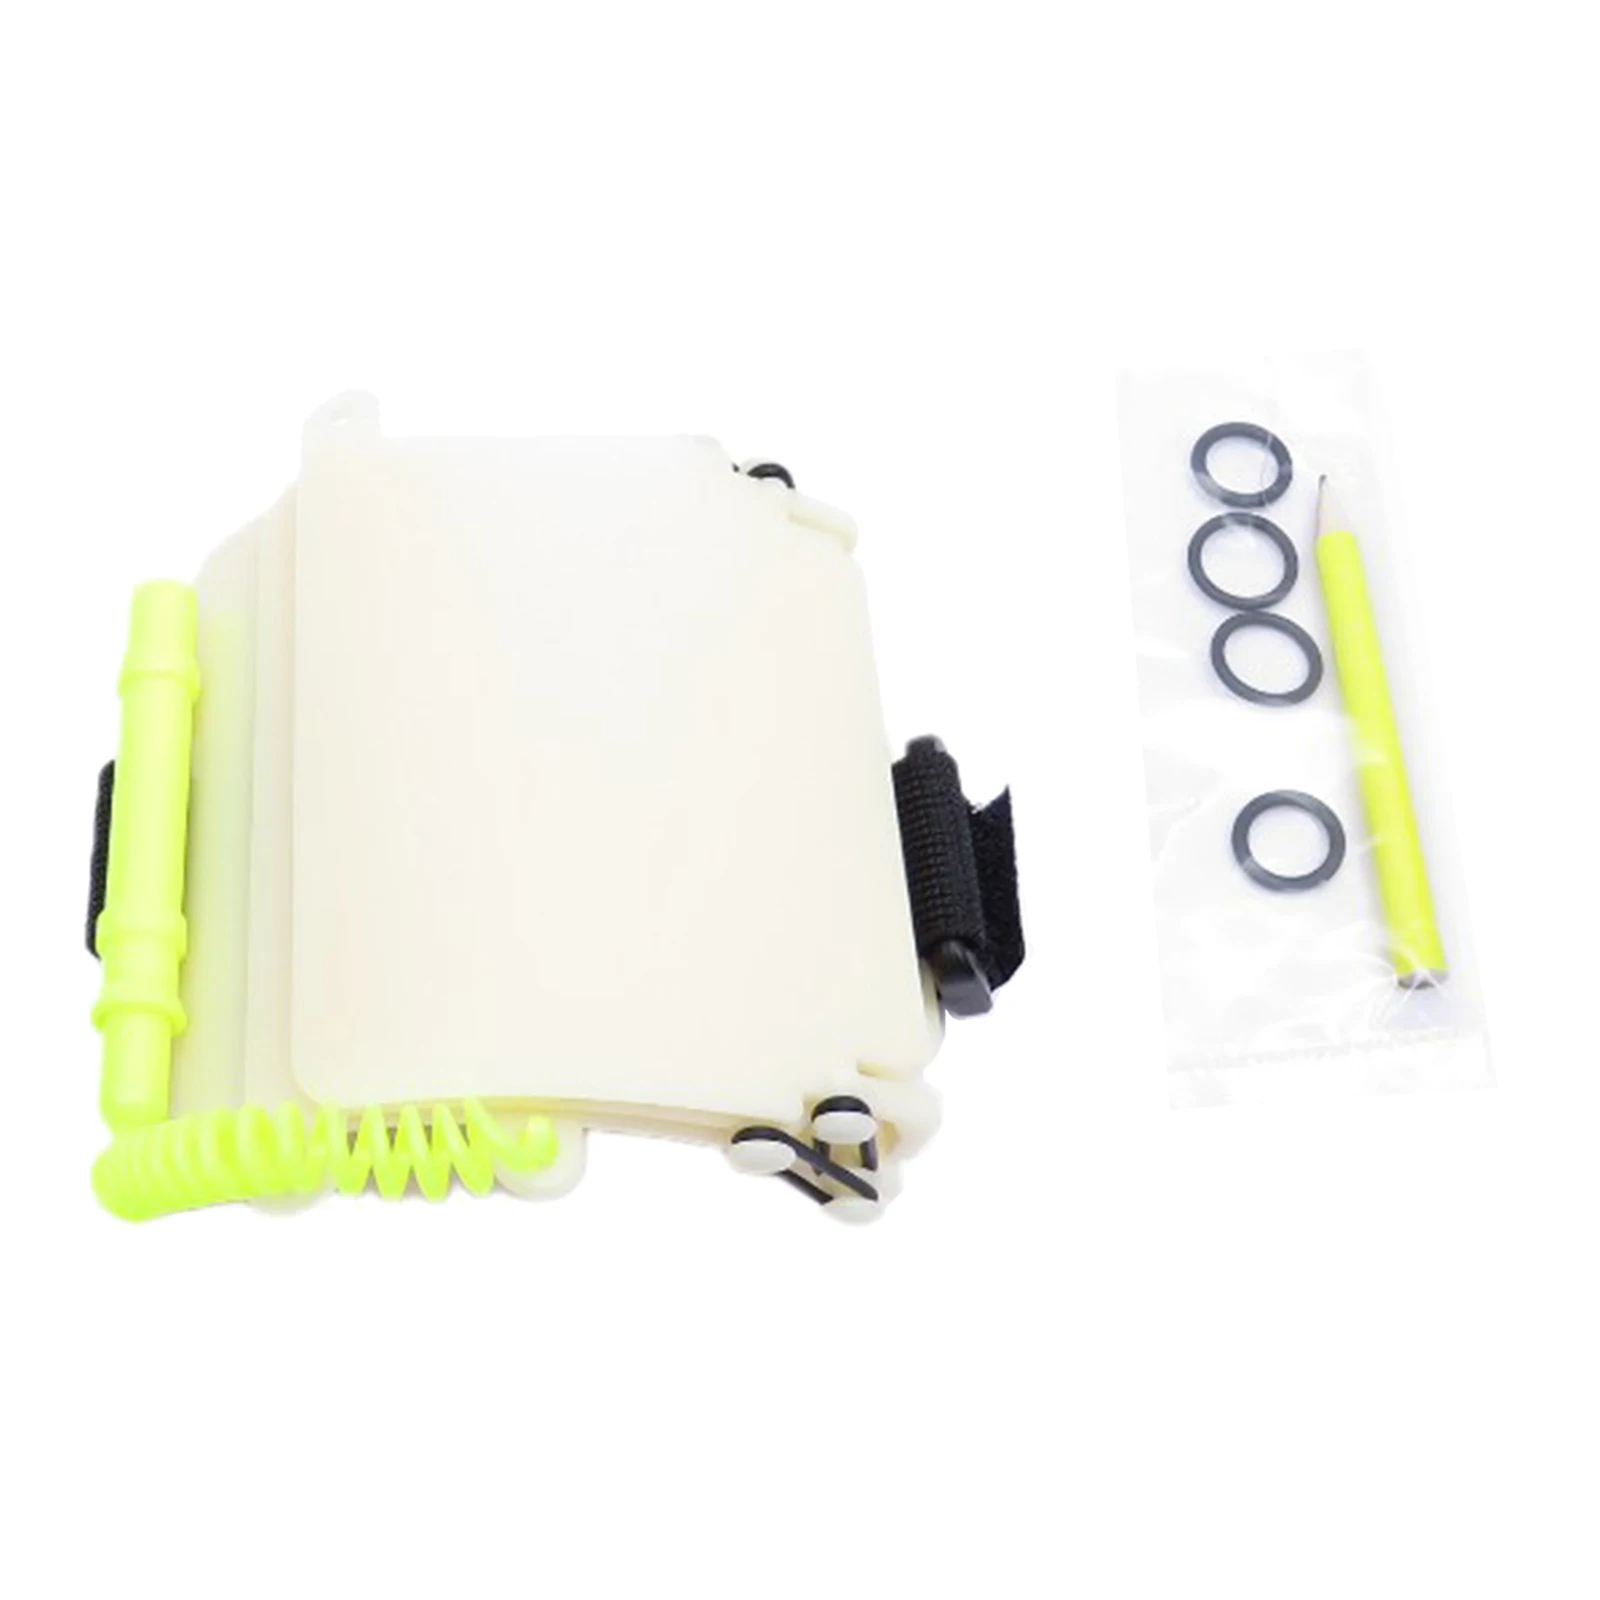 Diving Notebook Scuba Diving Logbook Underwater Convenient Diving Notebook Journal Arms Backpack